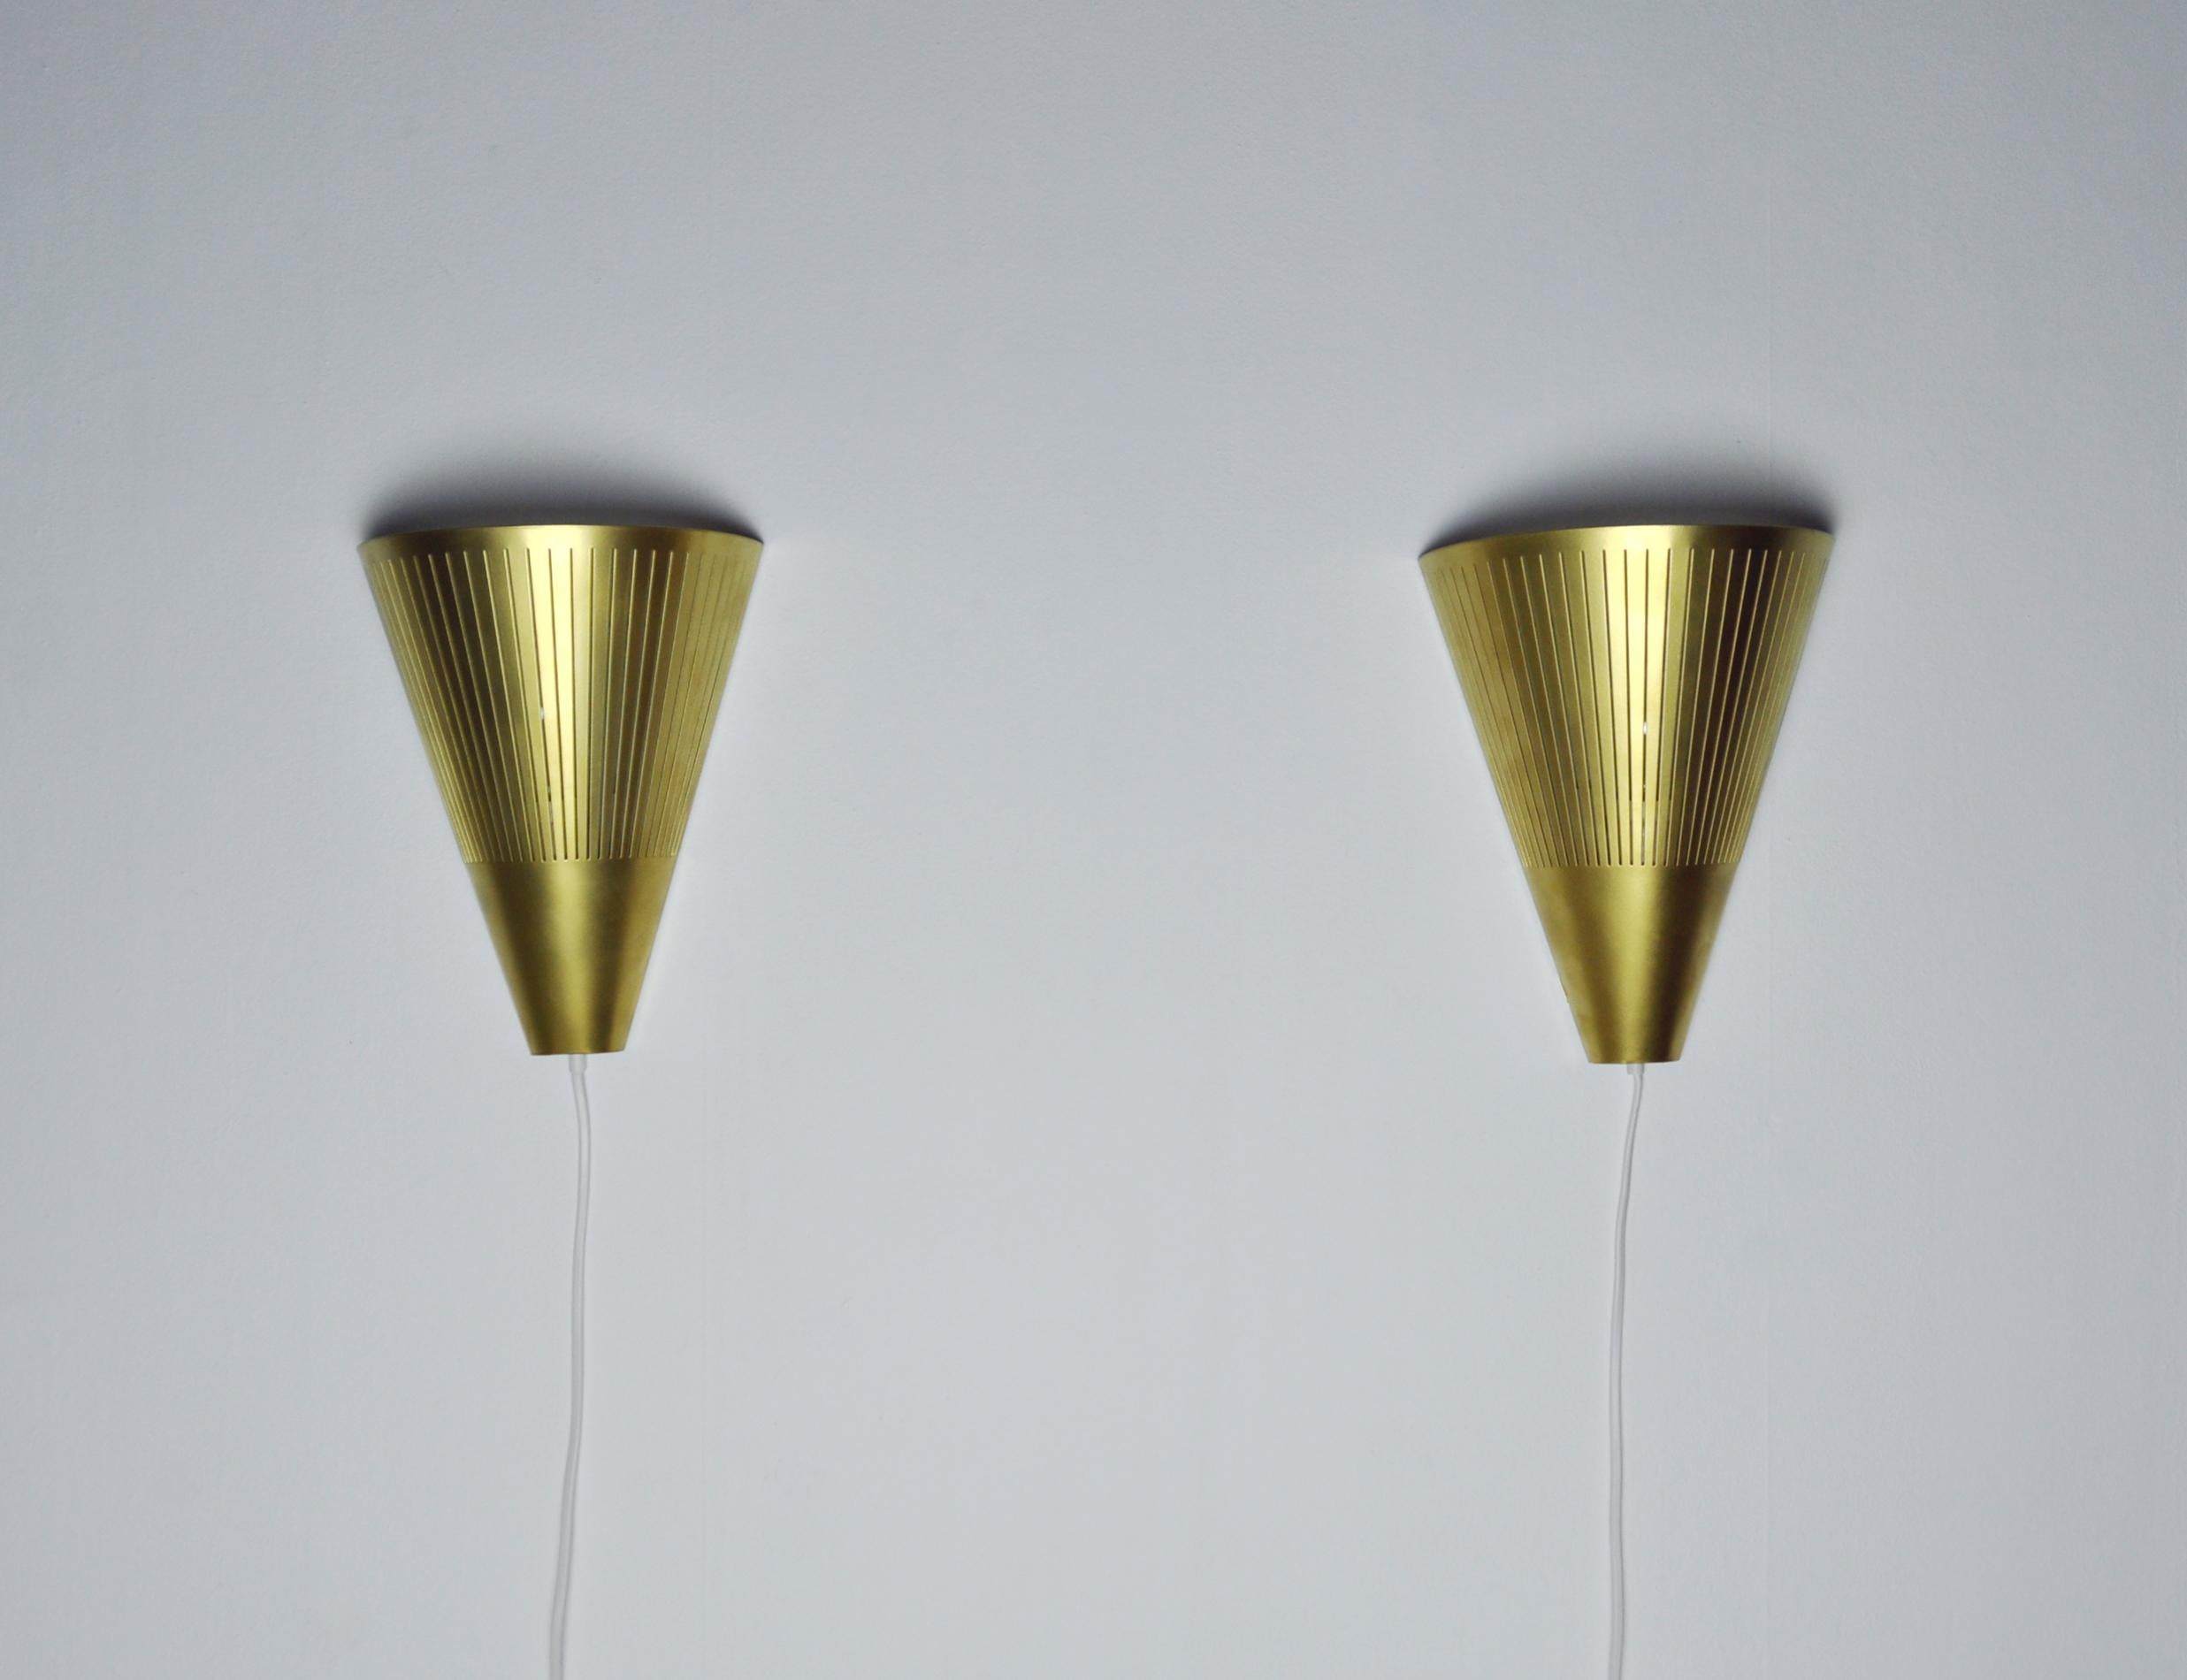 A pair of brass wall lamps produced by the Danish company Lyfa in the 1960s-1970s.
Both pieces has an original label on the inside.
Excellent condition, never used.

Light source: E14 Edison screw fitting, 40 watt.